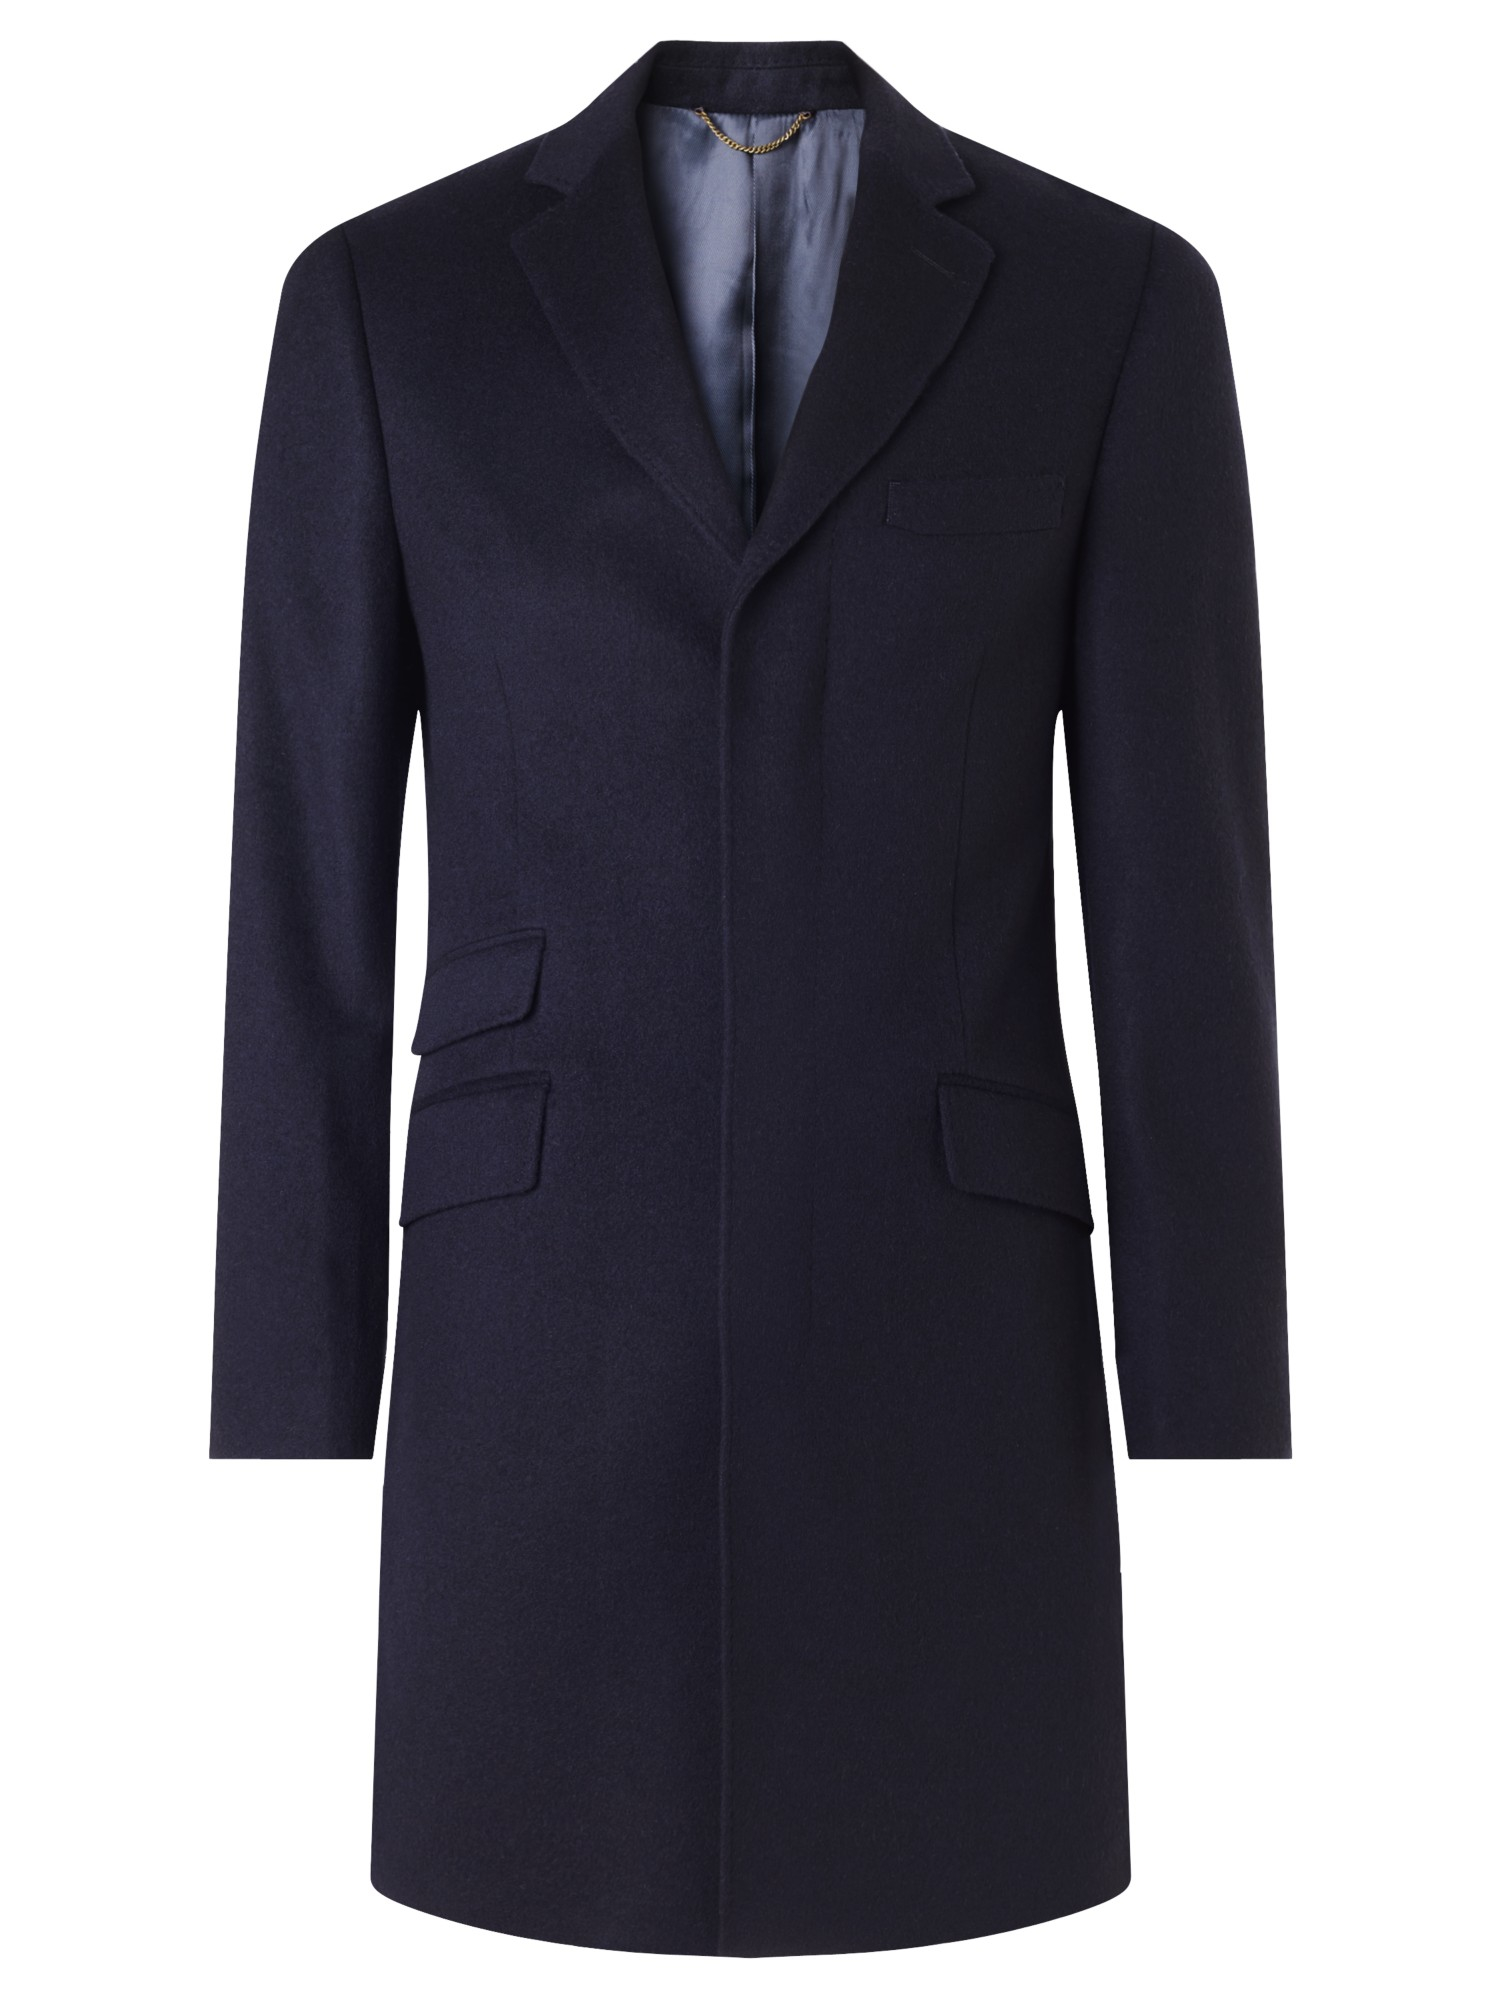 John lewis Wool Cashmere Tailored Fit Coat in Blue for Men | Lyst